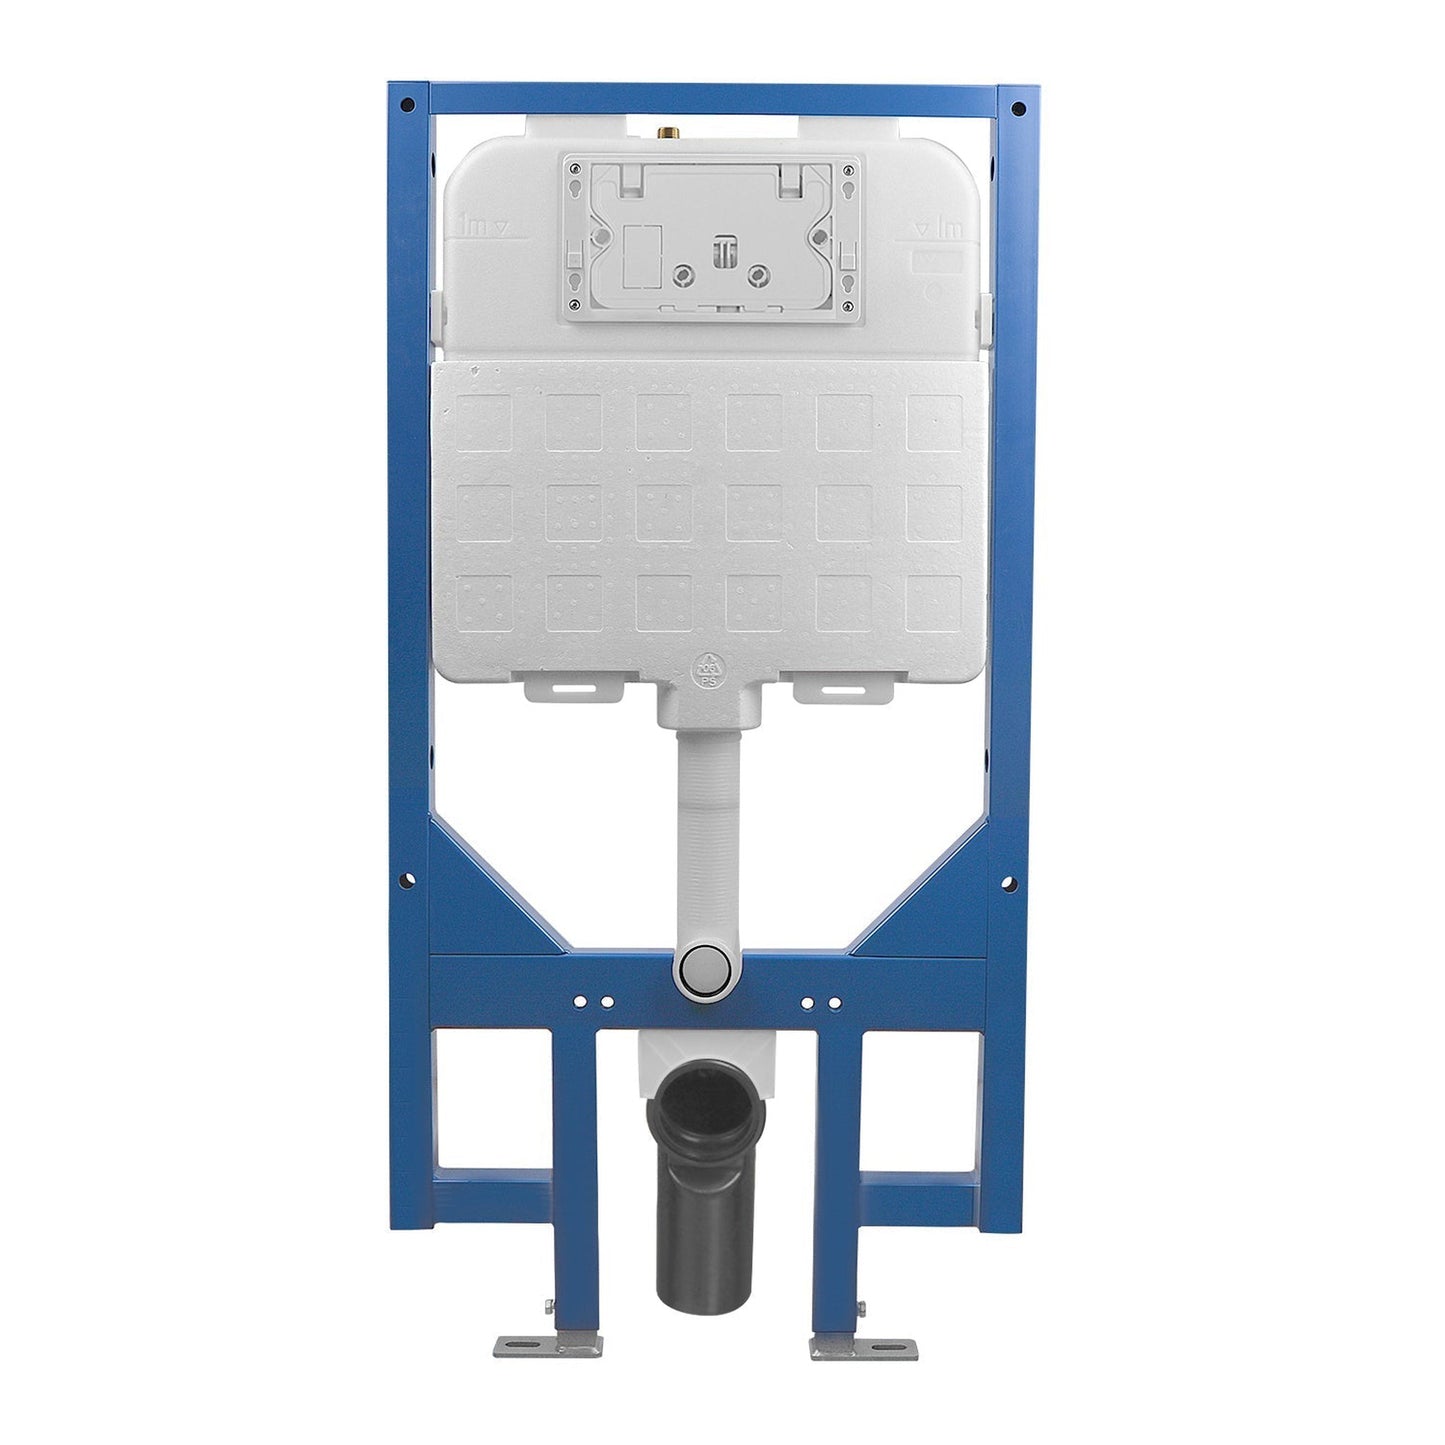 DeerValley DV-1C0087 Concealed In-Wall Toilet Tank (Fit With DV-1F0069/DV-1F0070)